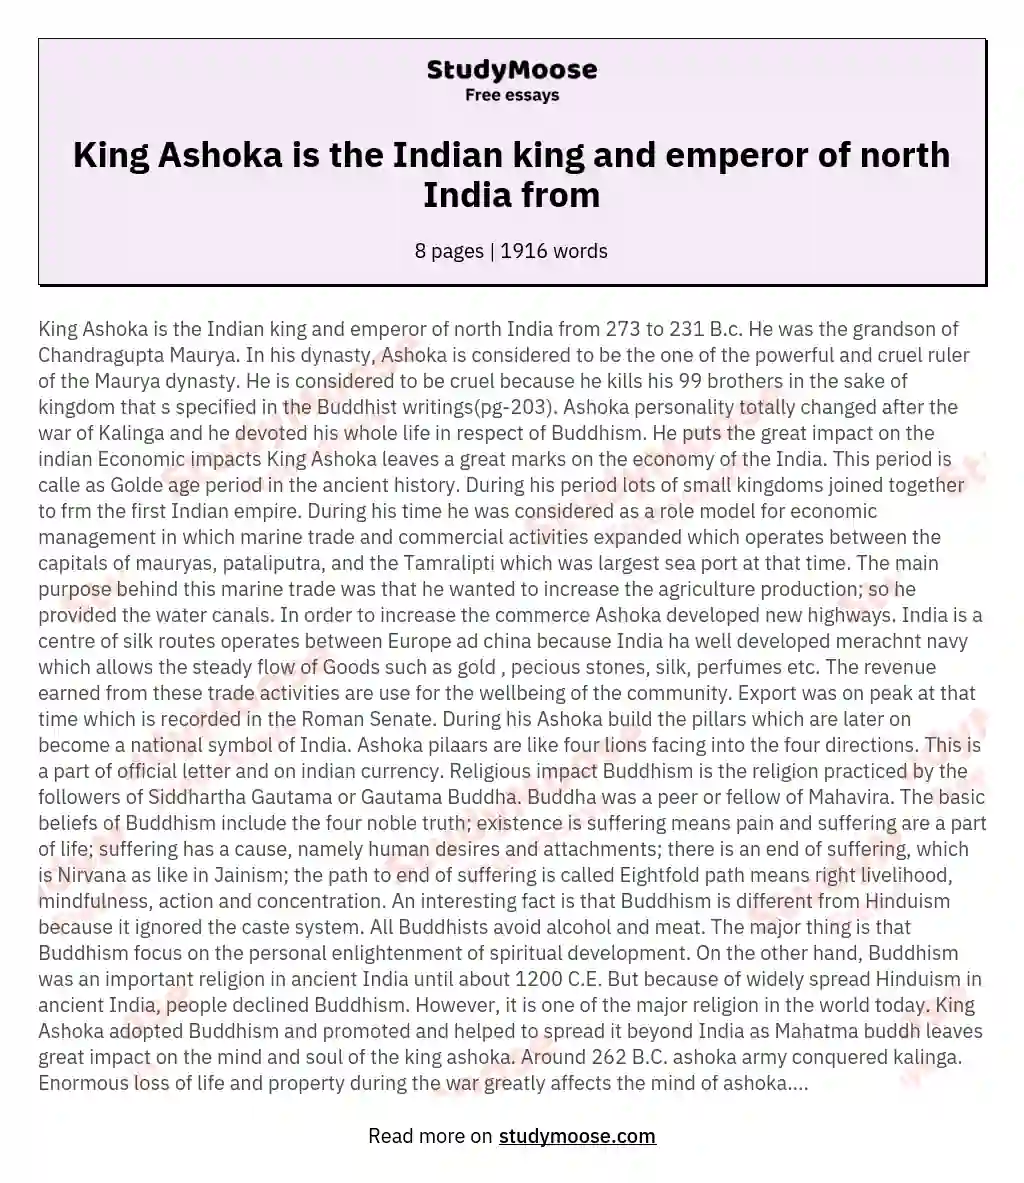 King Ashoka is the Indian king and emperor of north India from essay